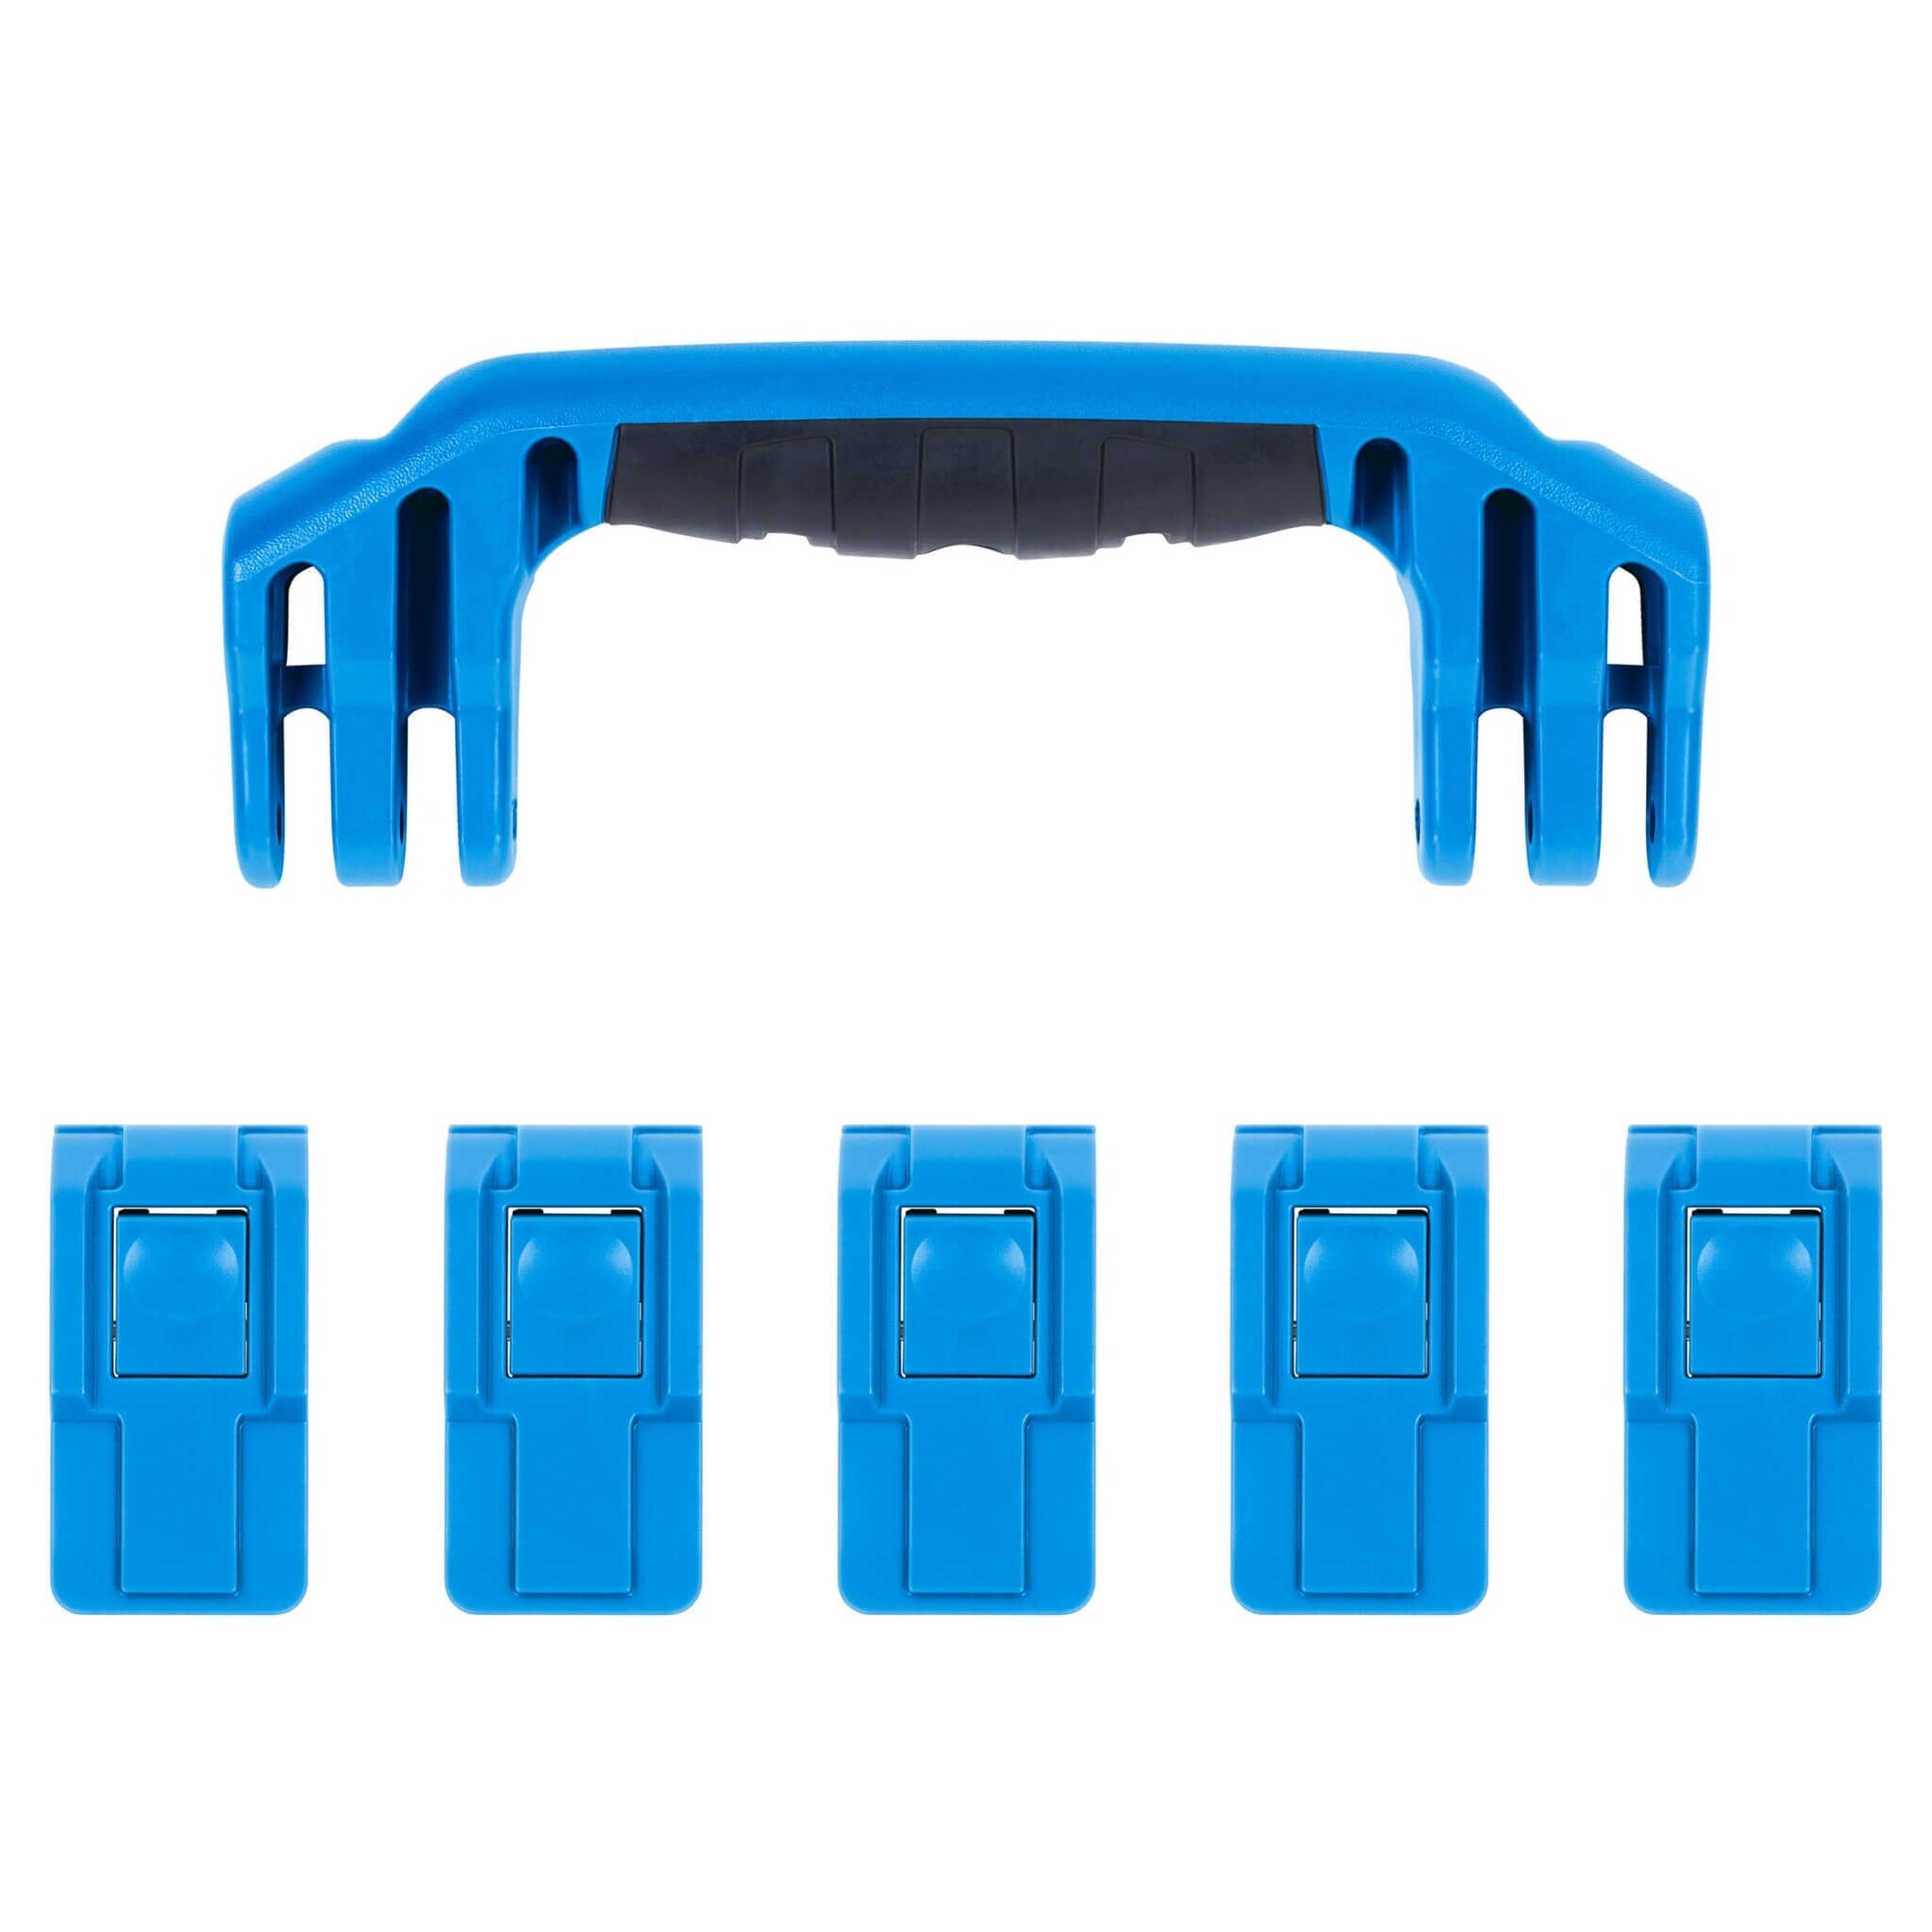 Pelican 1605 Air Replacement Handle & Latches, Blue (Set of 1 Handle, 5 Latches) ColorCase 